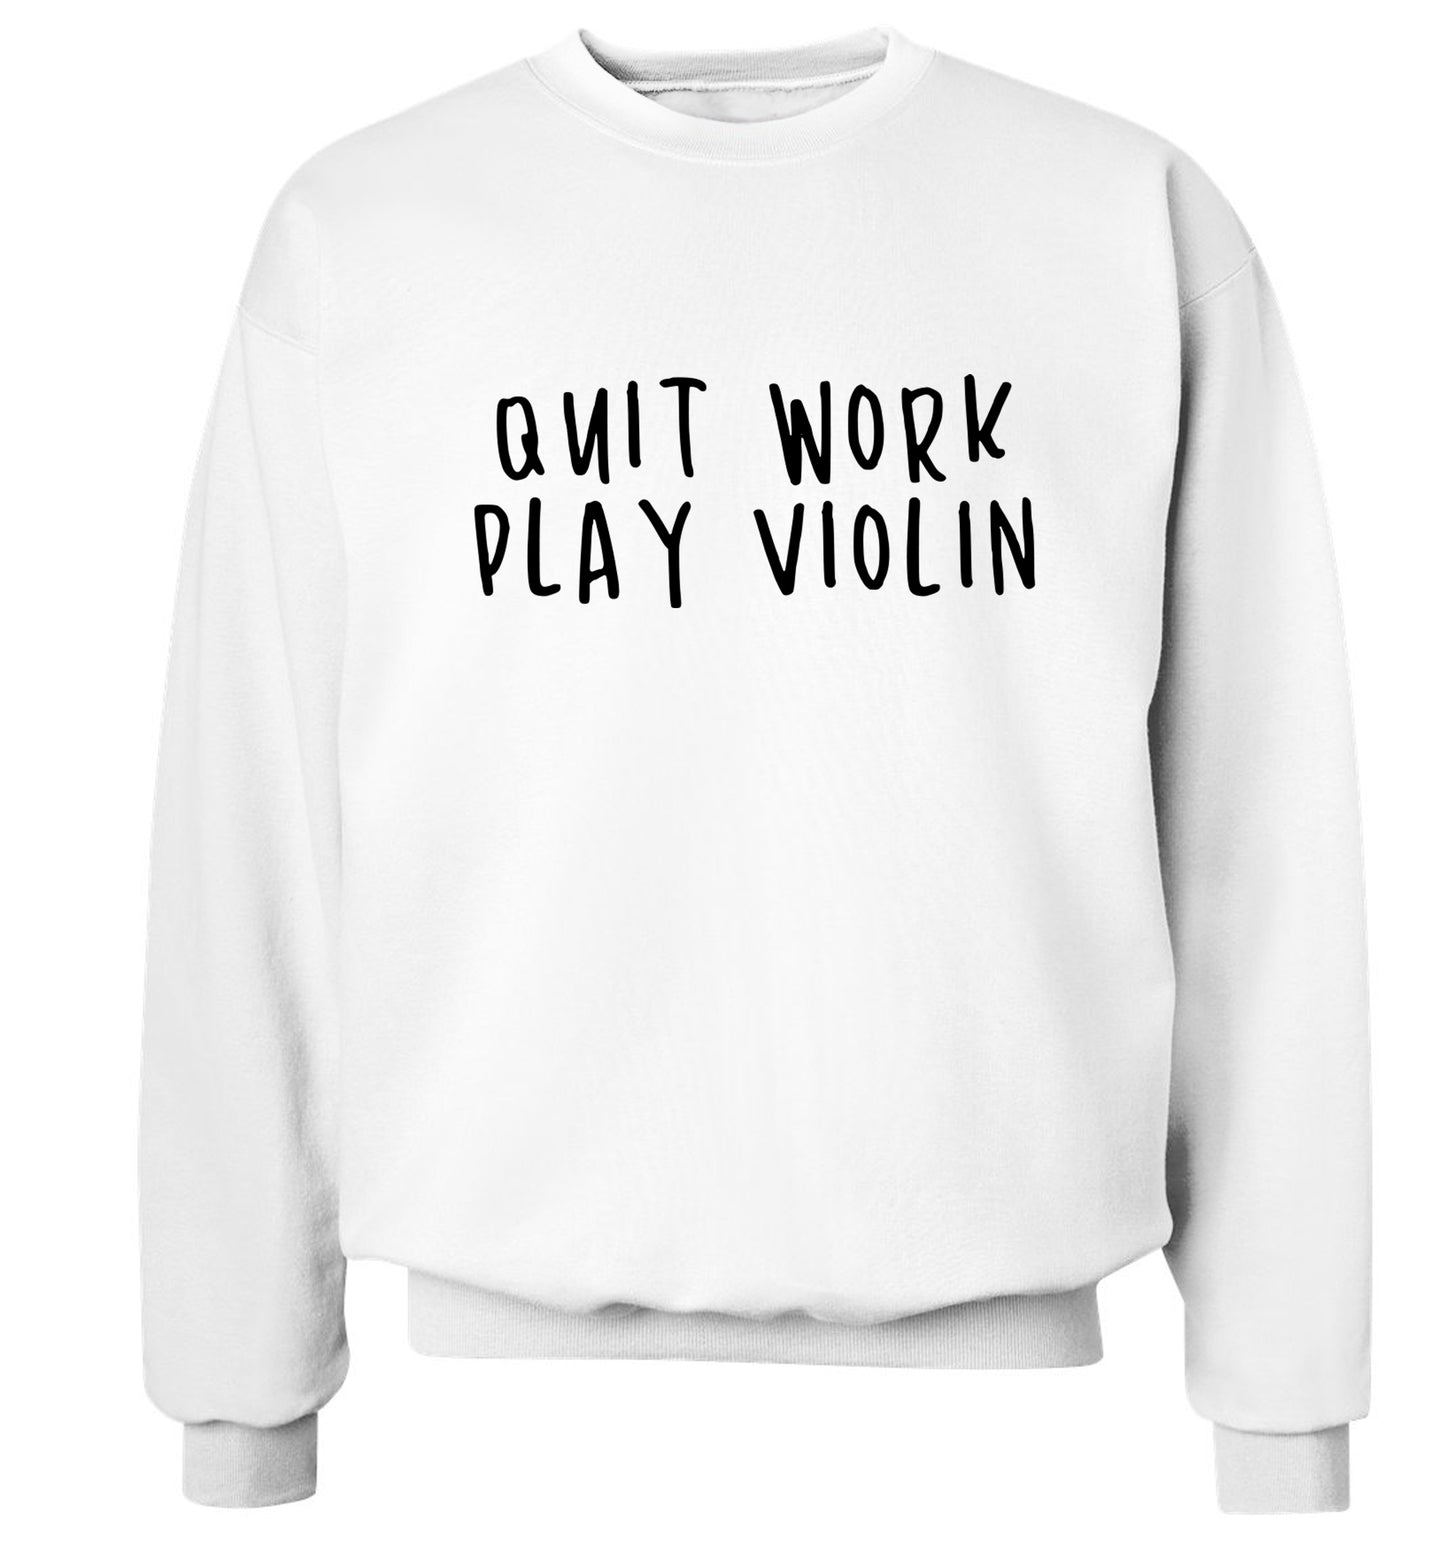 Quit work play violin Adult's unisex white Sweater 2XL